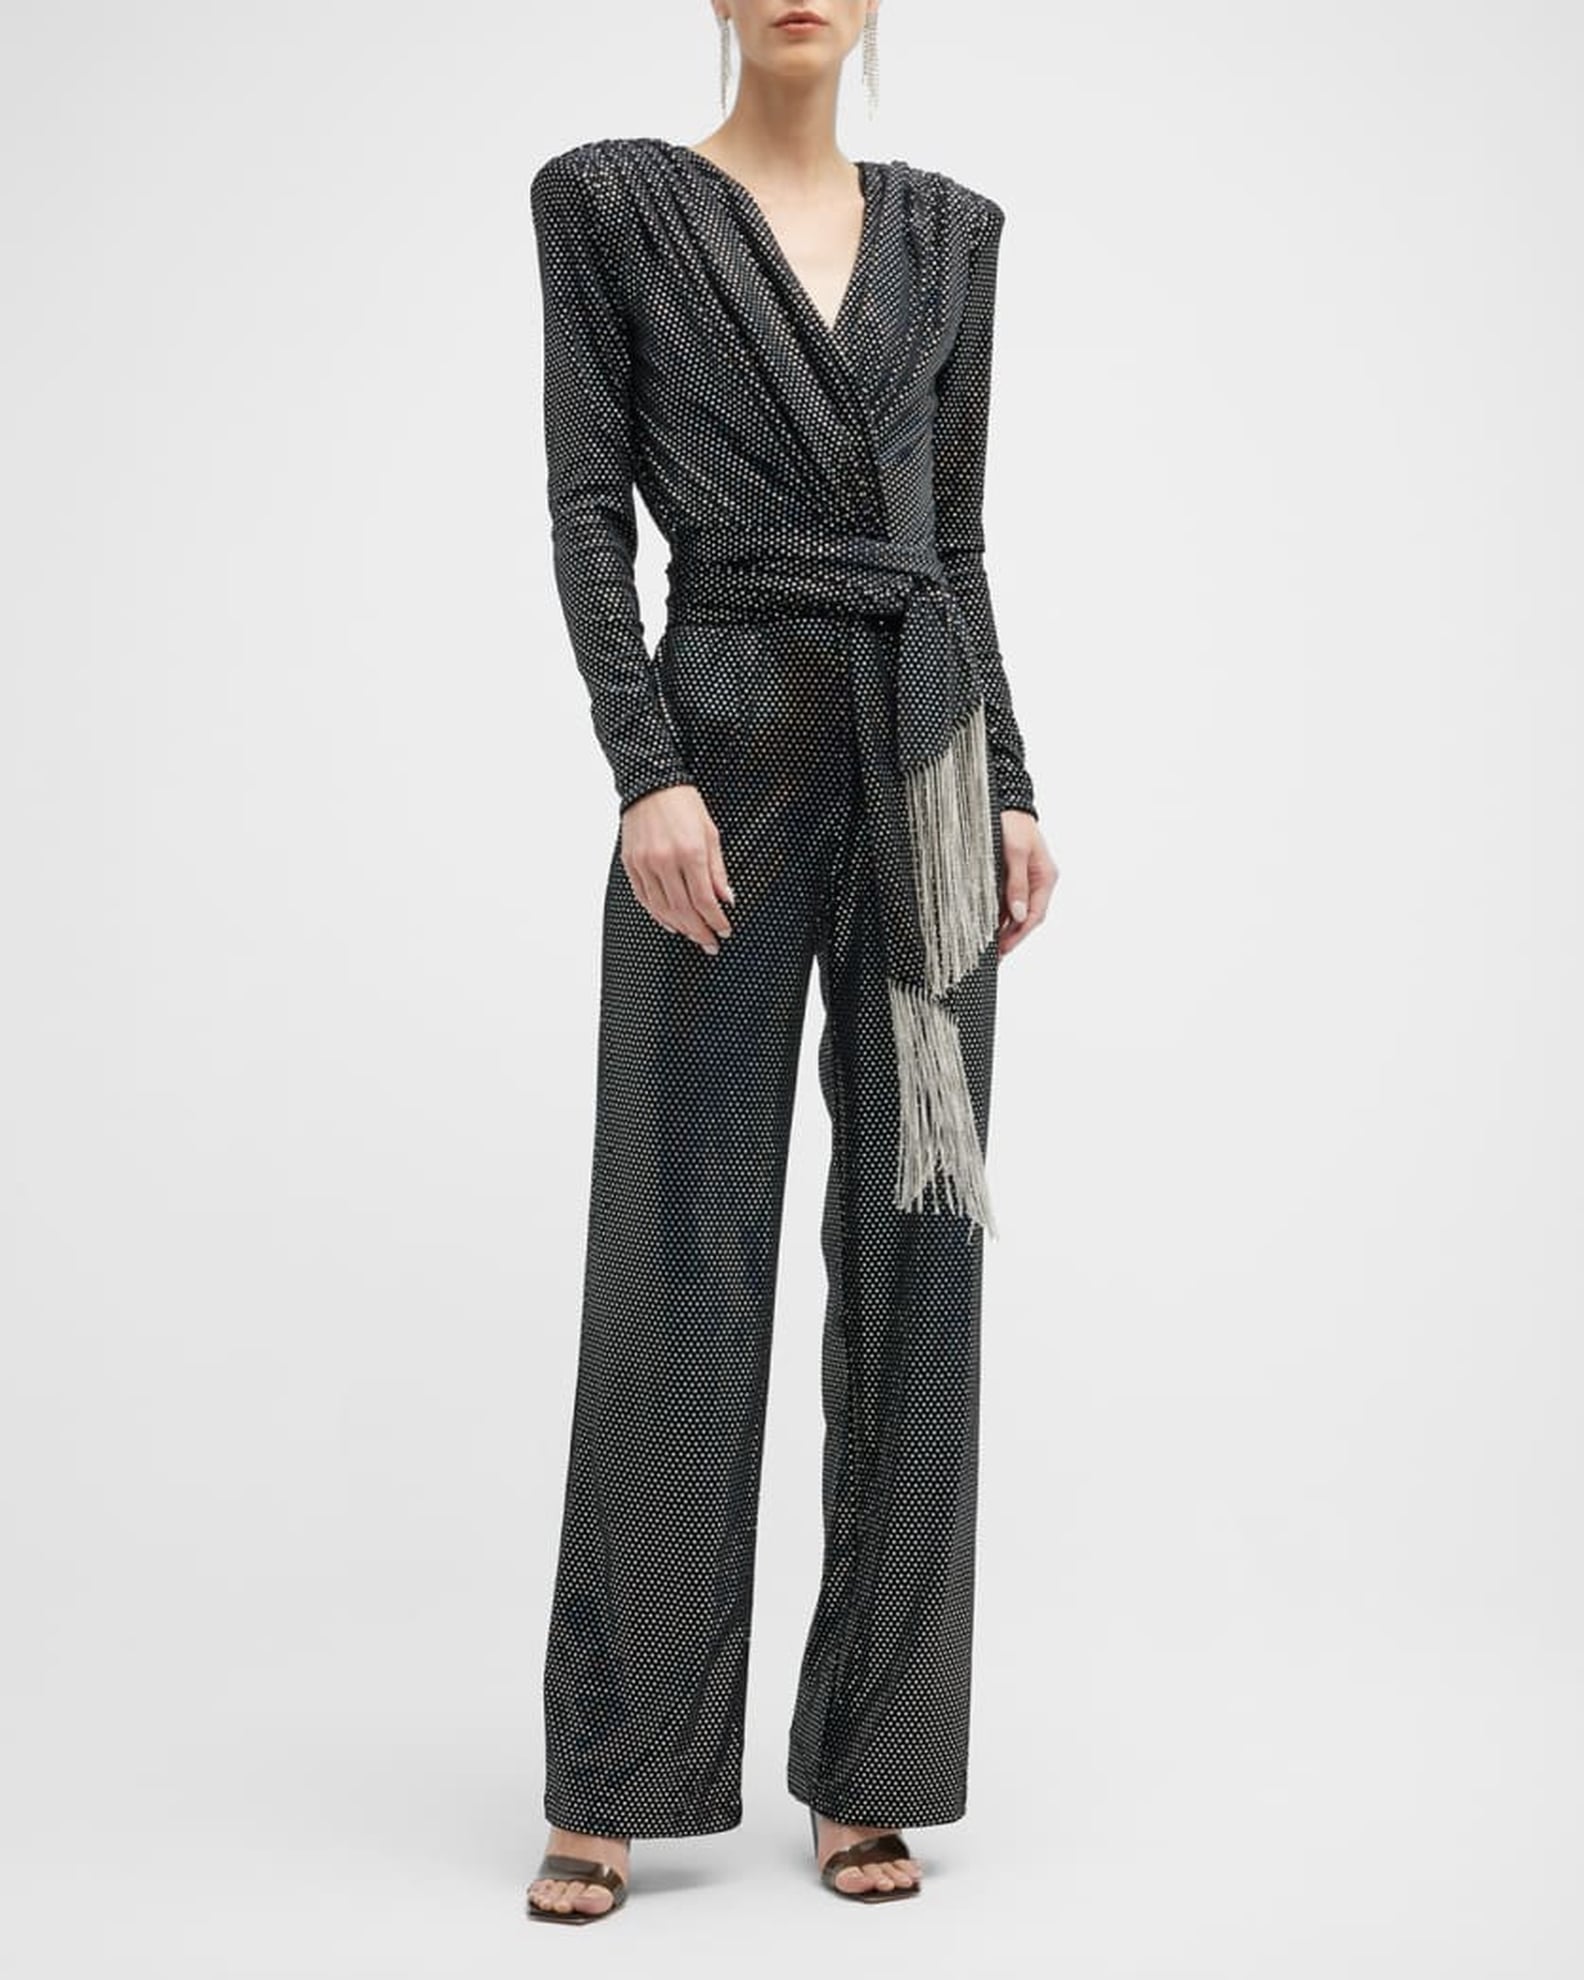 Sequin Jumpsuits For Holiday Parties | POPSUGAR Fashion